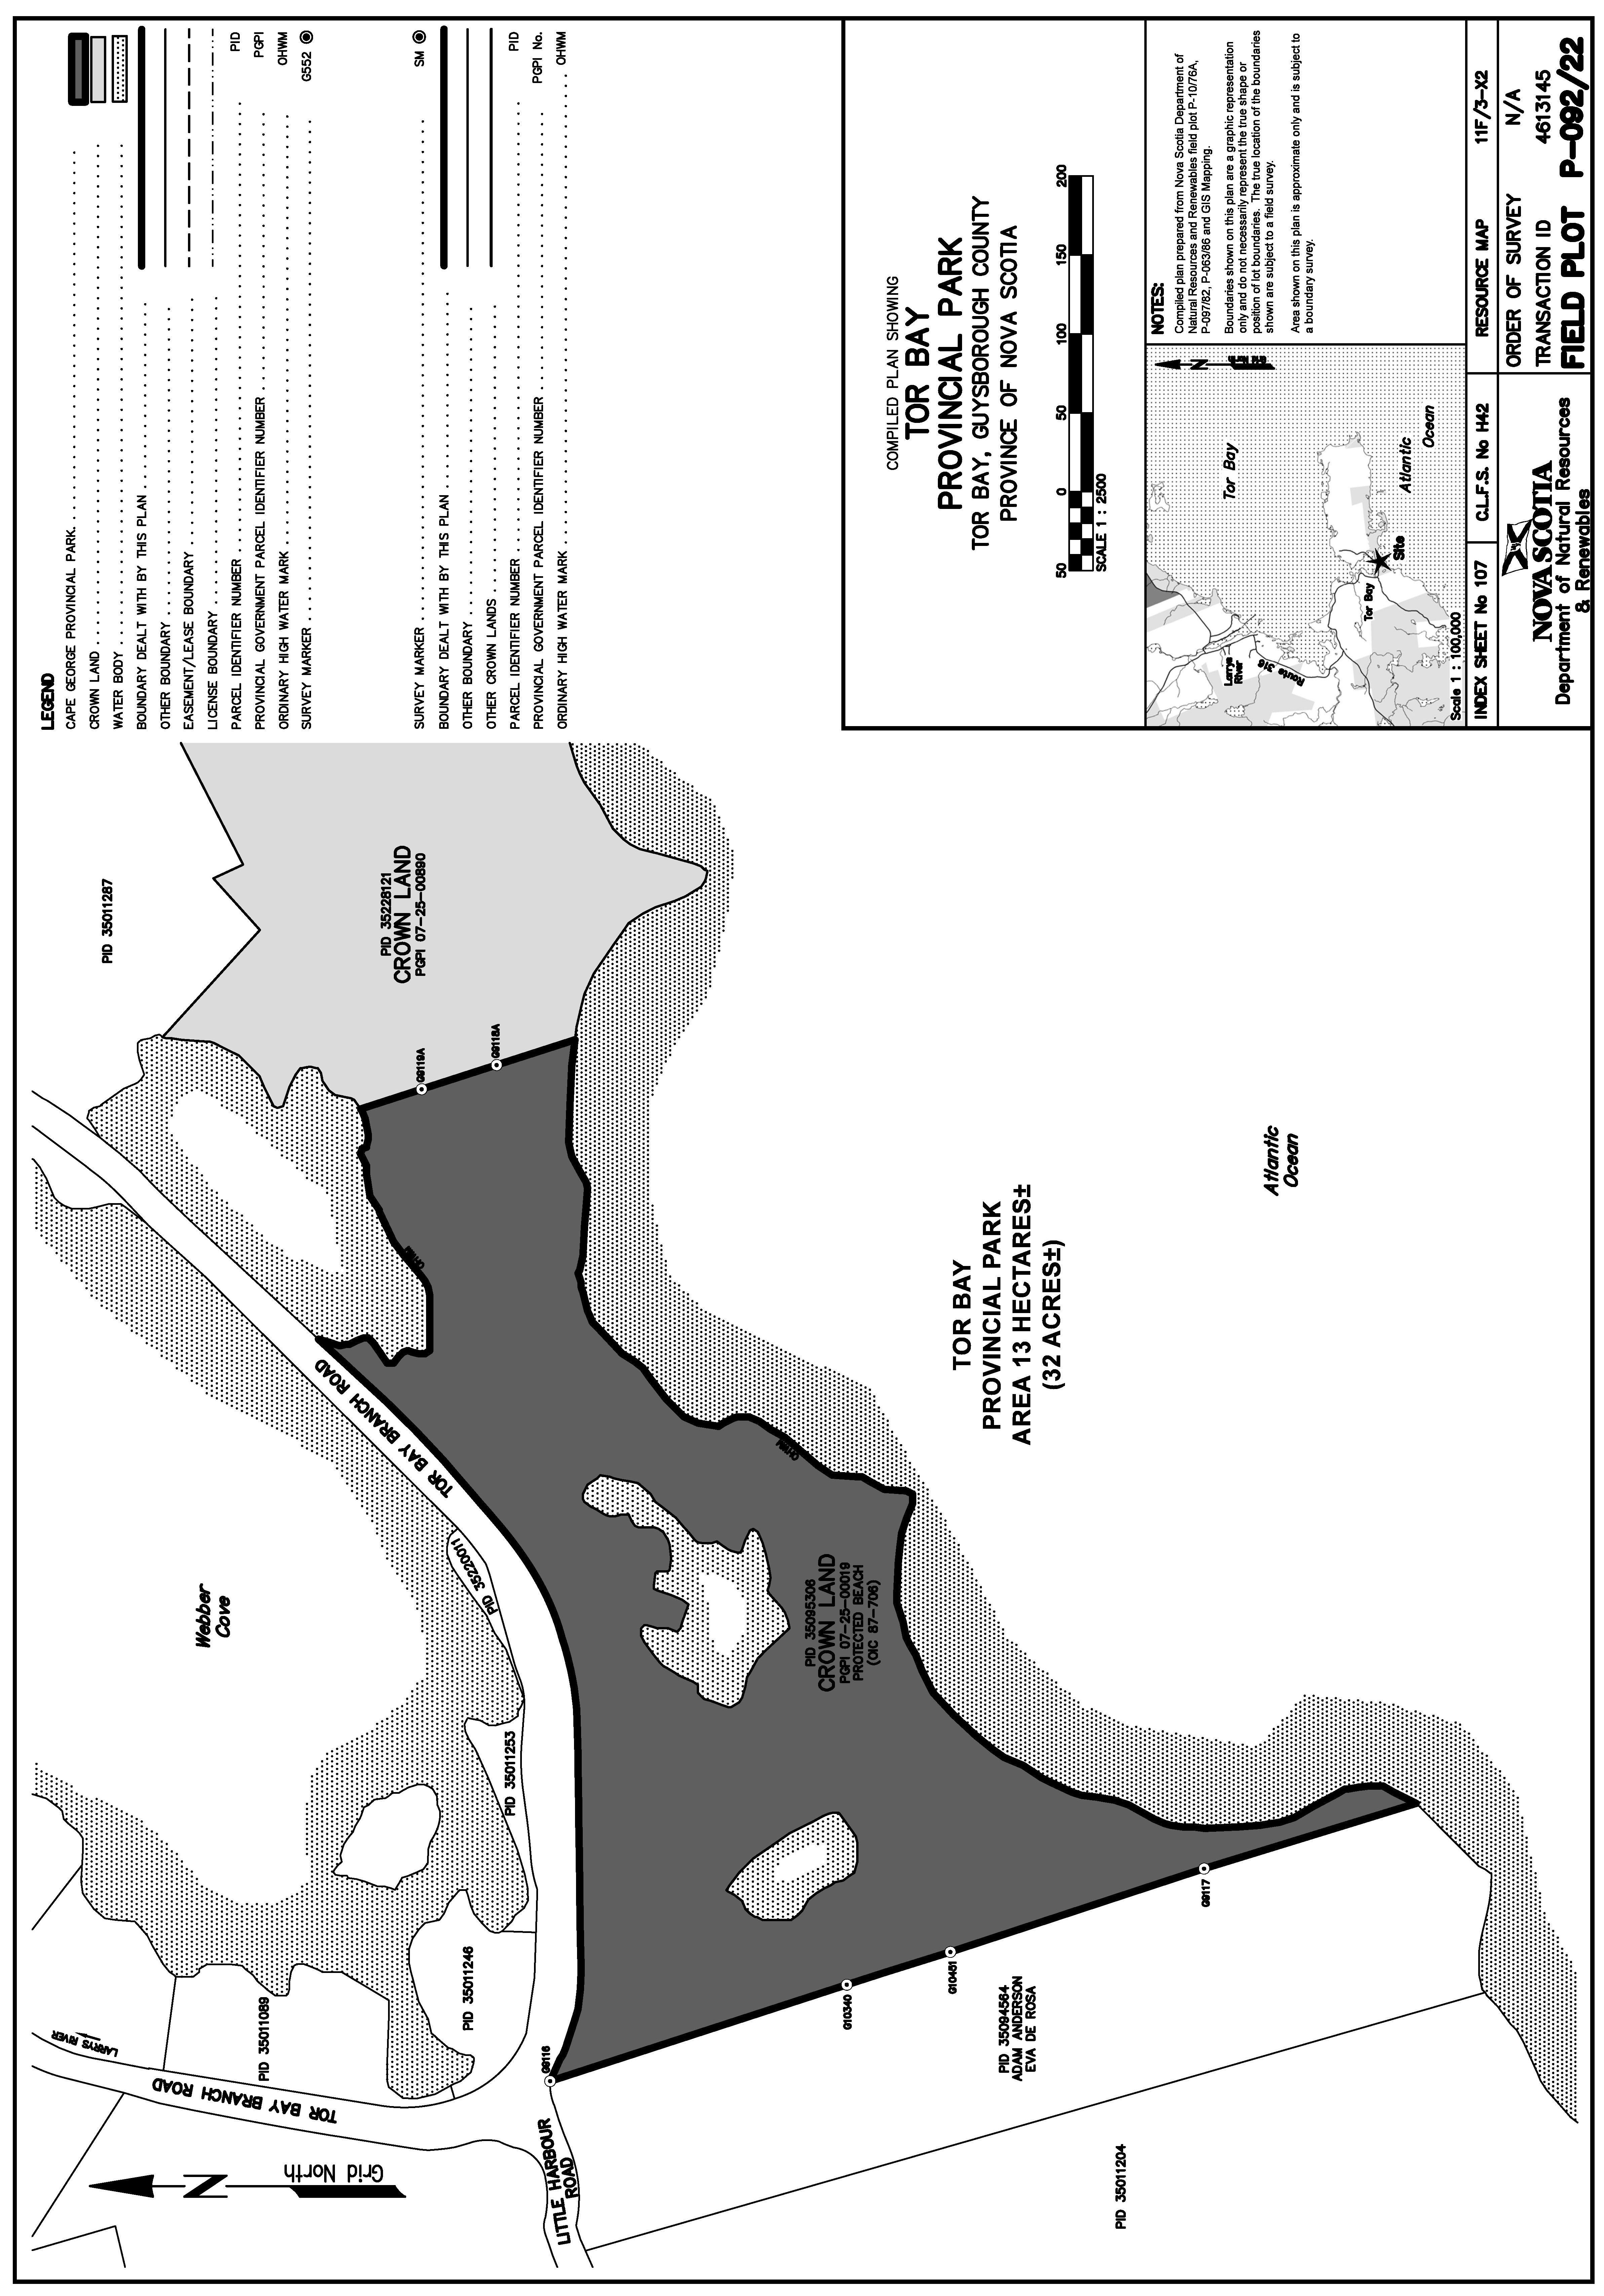 Graphic showing map of Tor Bay Provincial Park